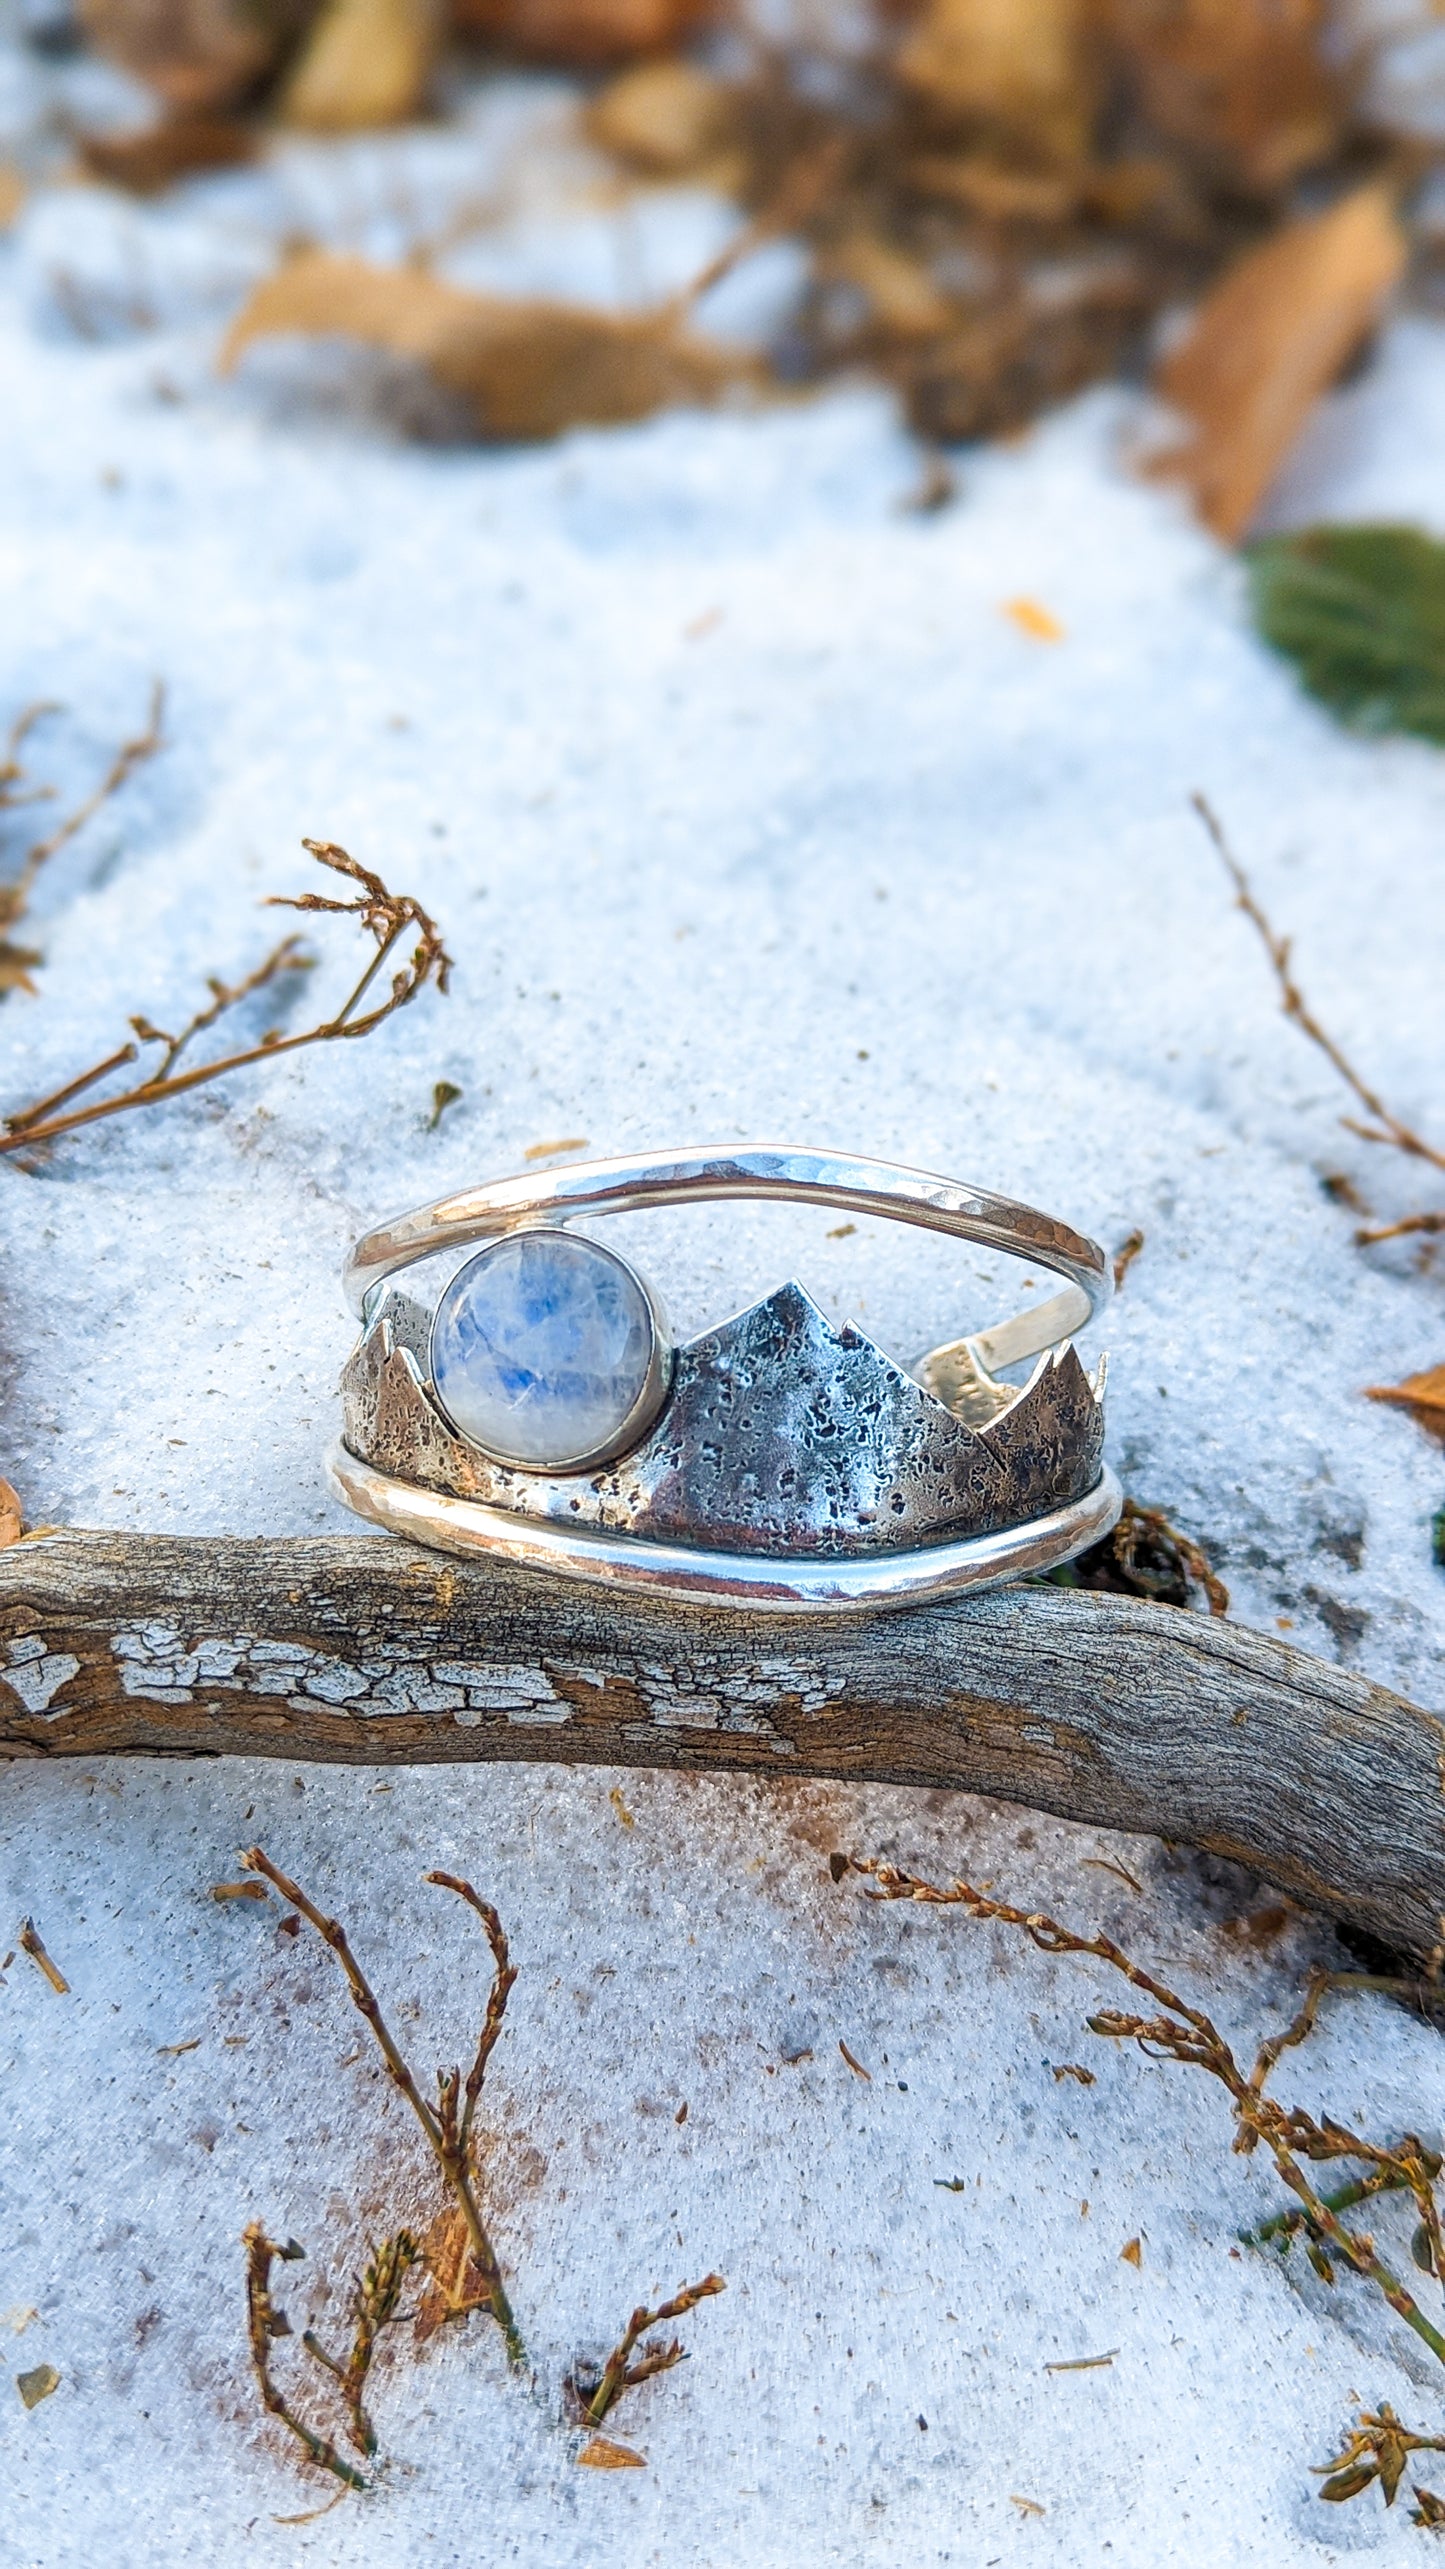 Cold Moon Cuff (Size 5.5")